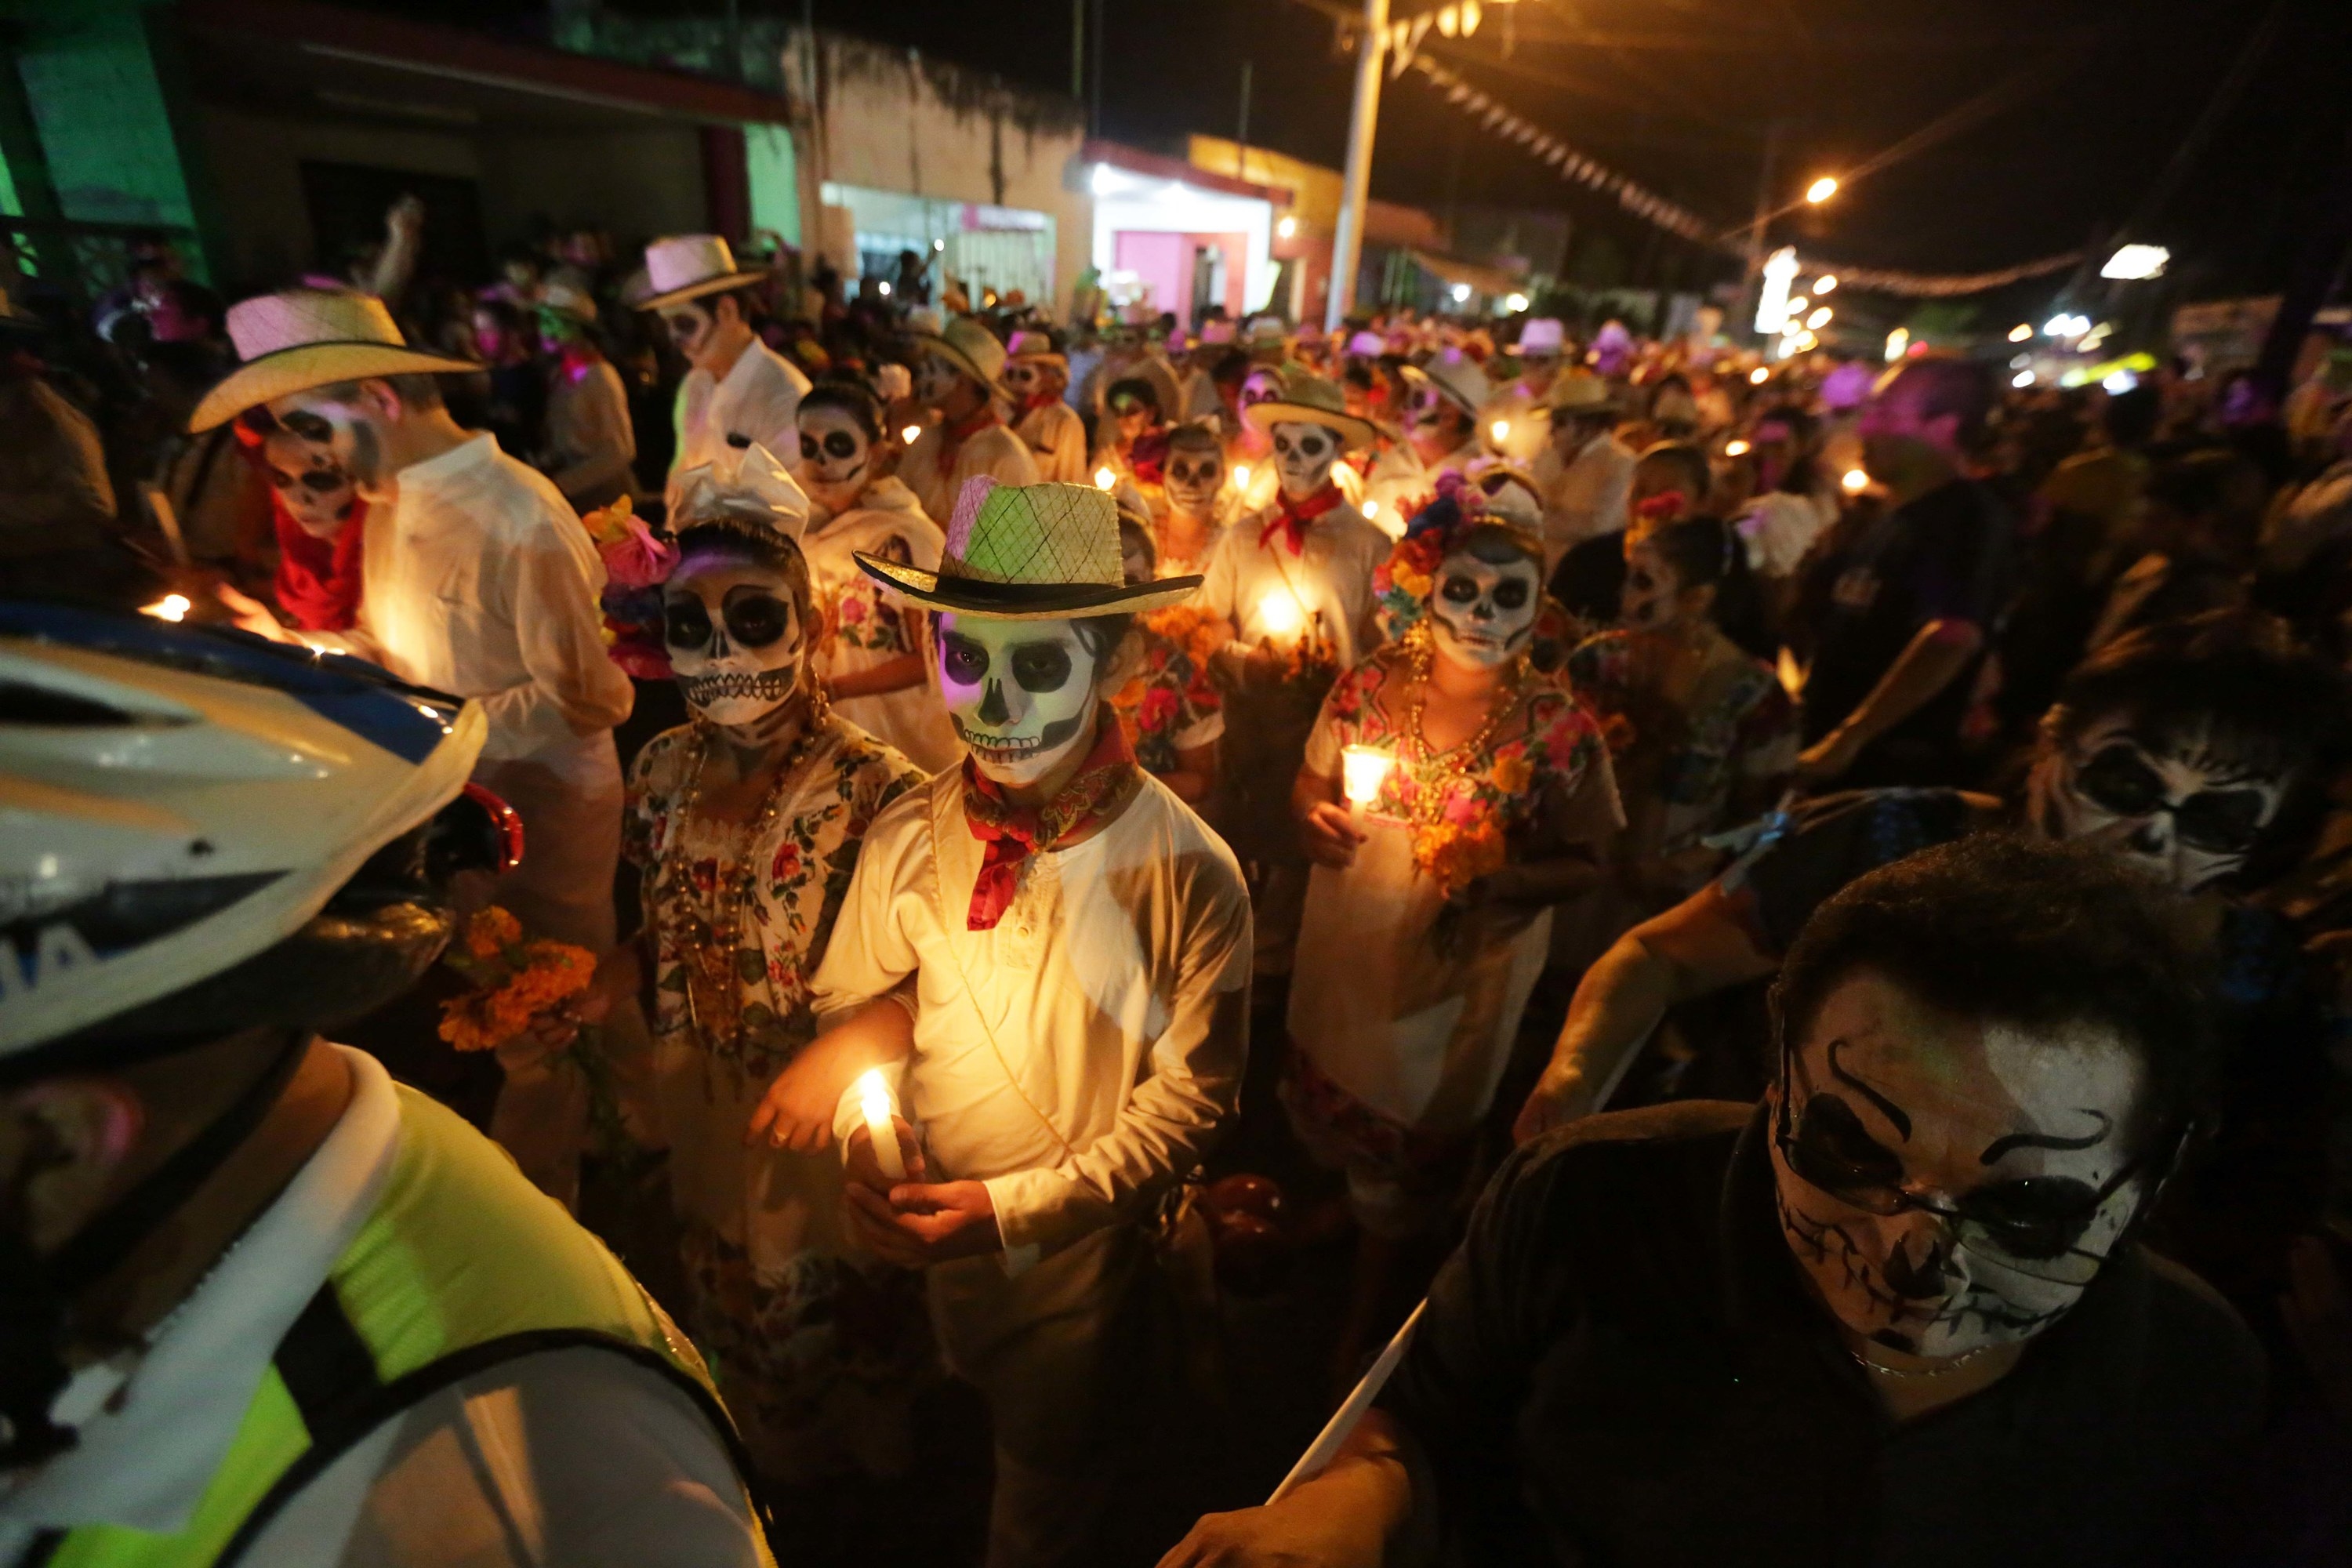 People with painted skull faces and holding candles walk along the street